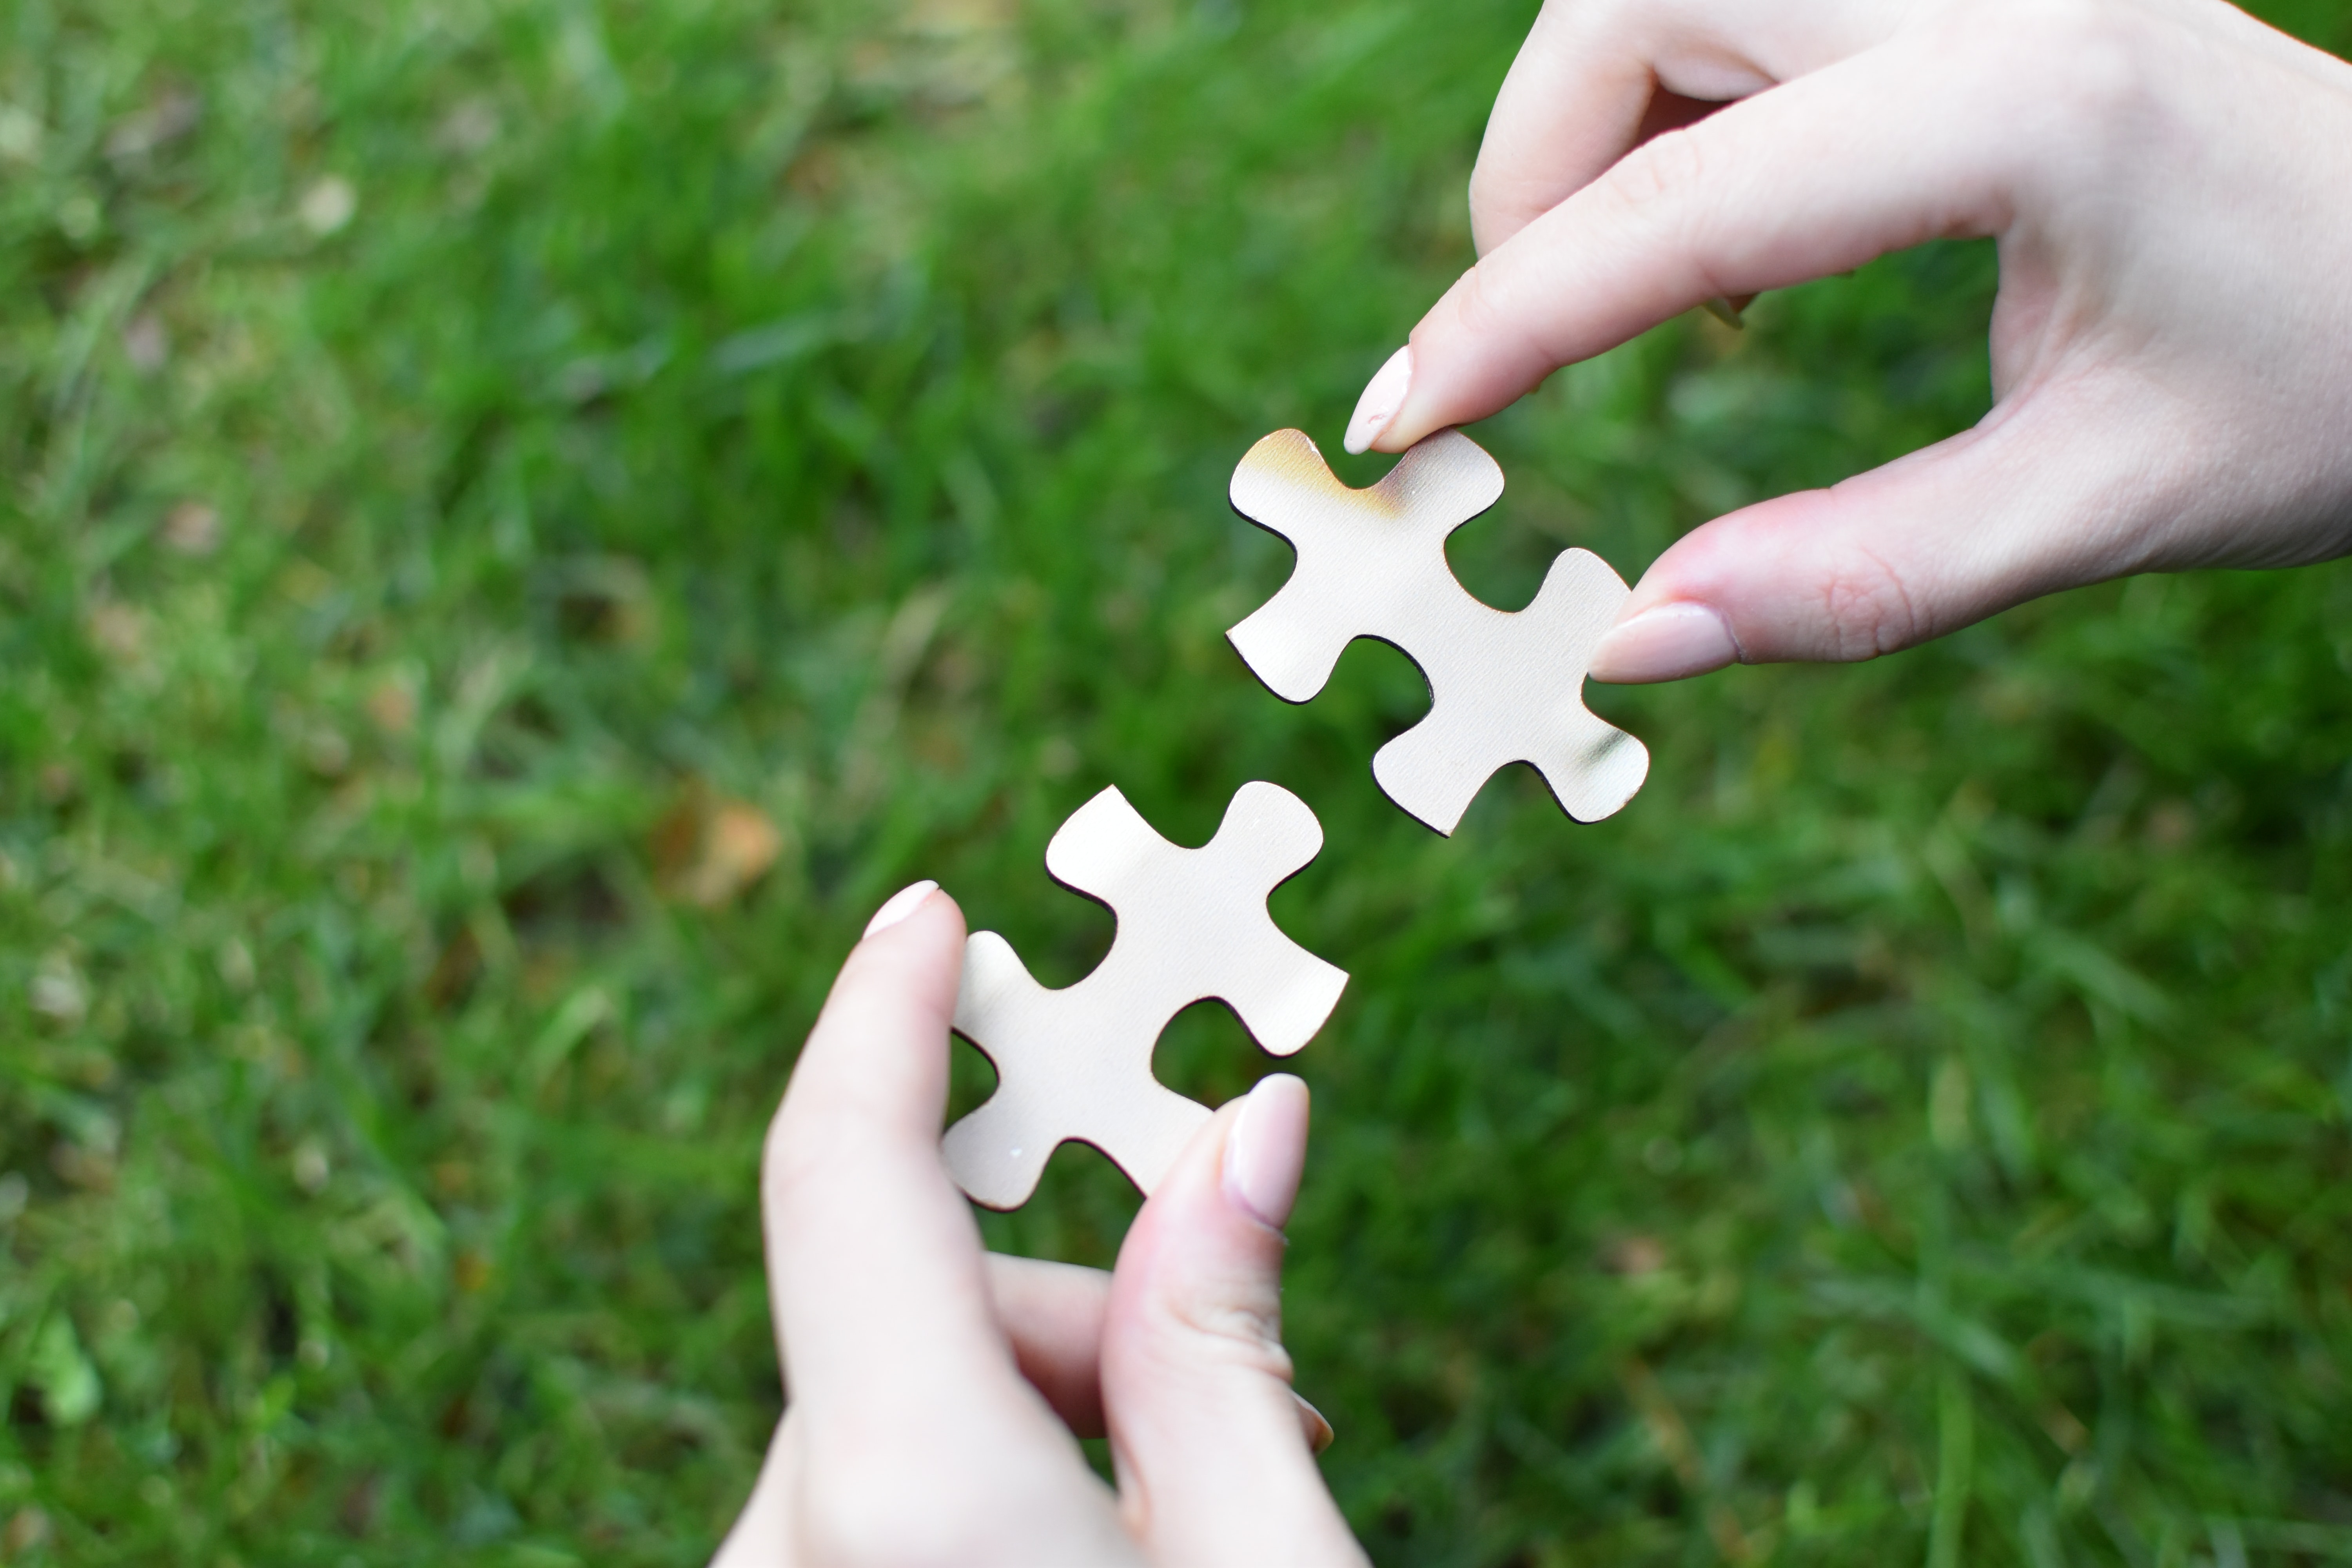 Decorative, hands placing 2 connecting puzzle pieces together above a green grass background